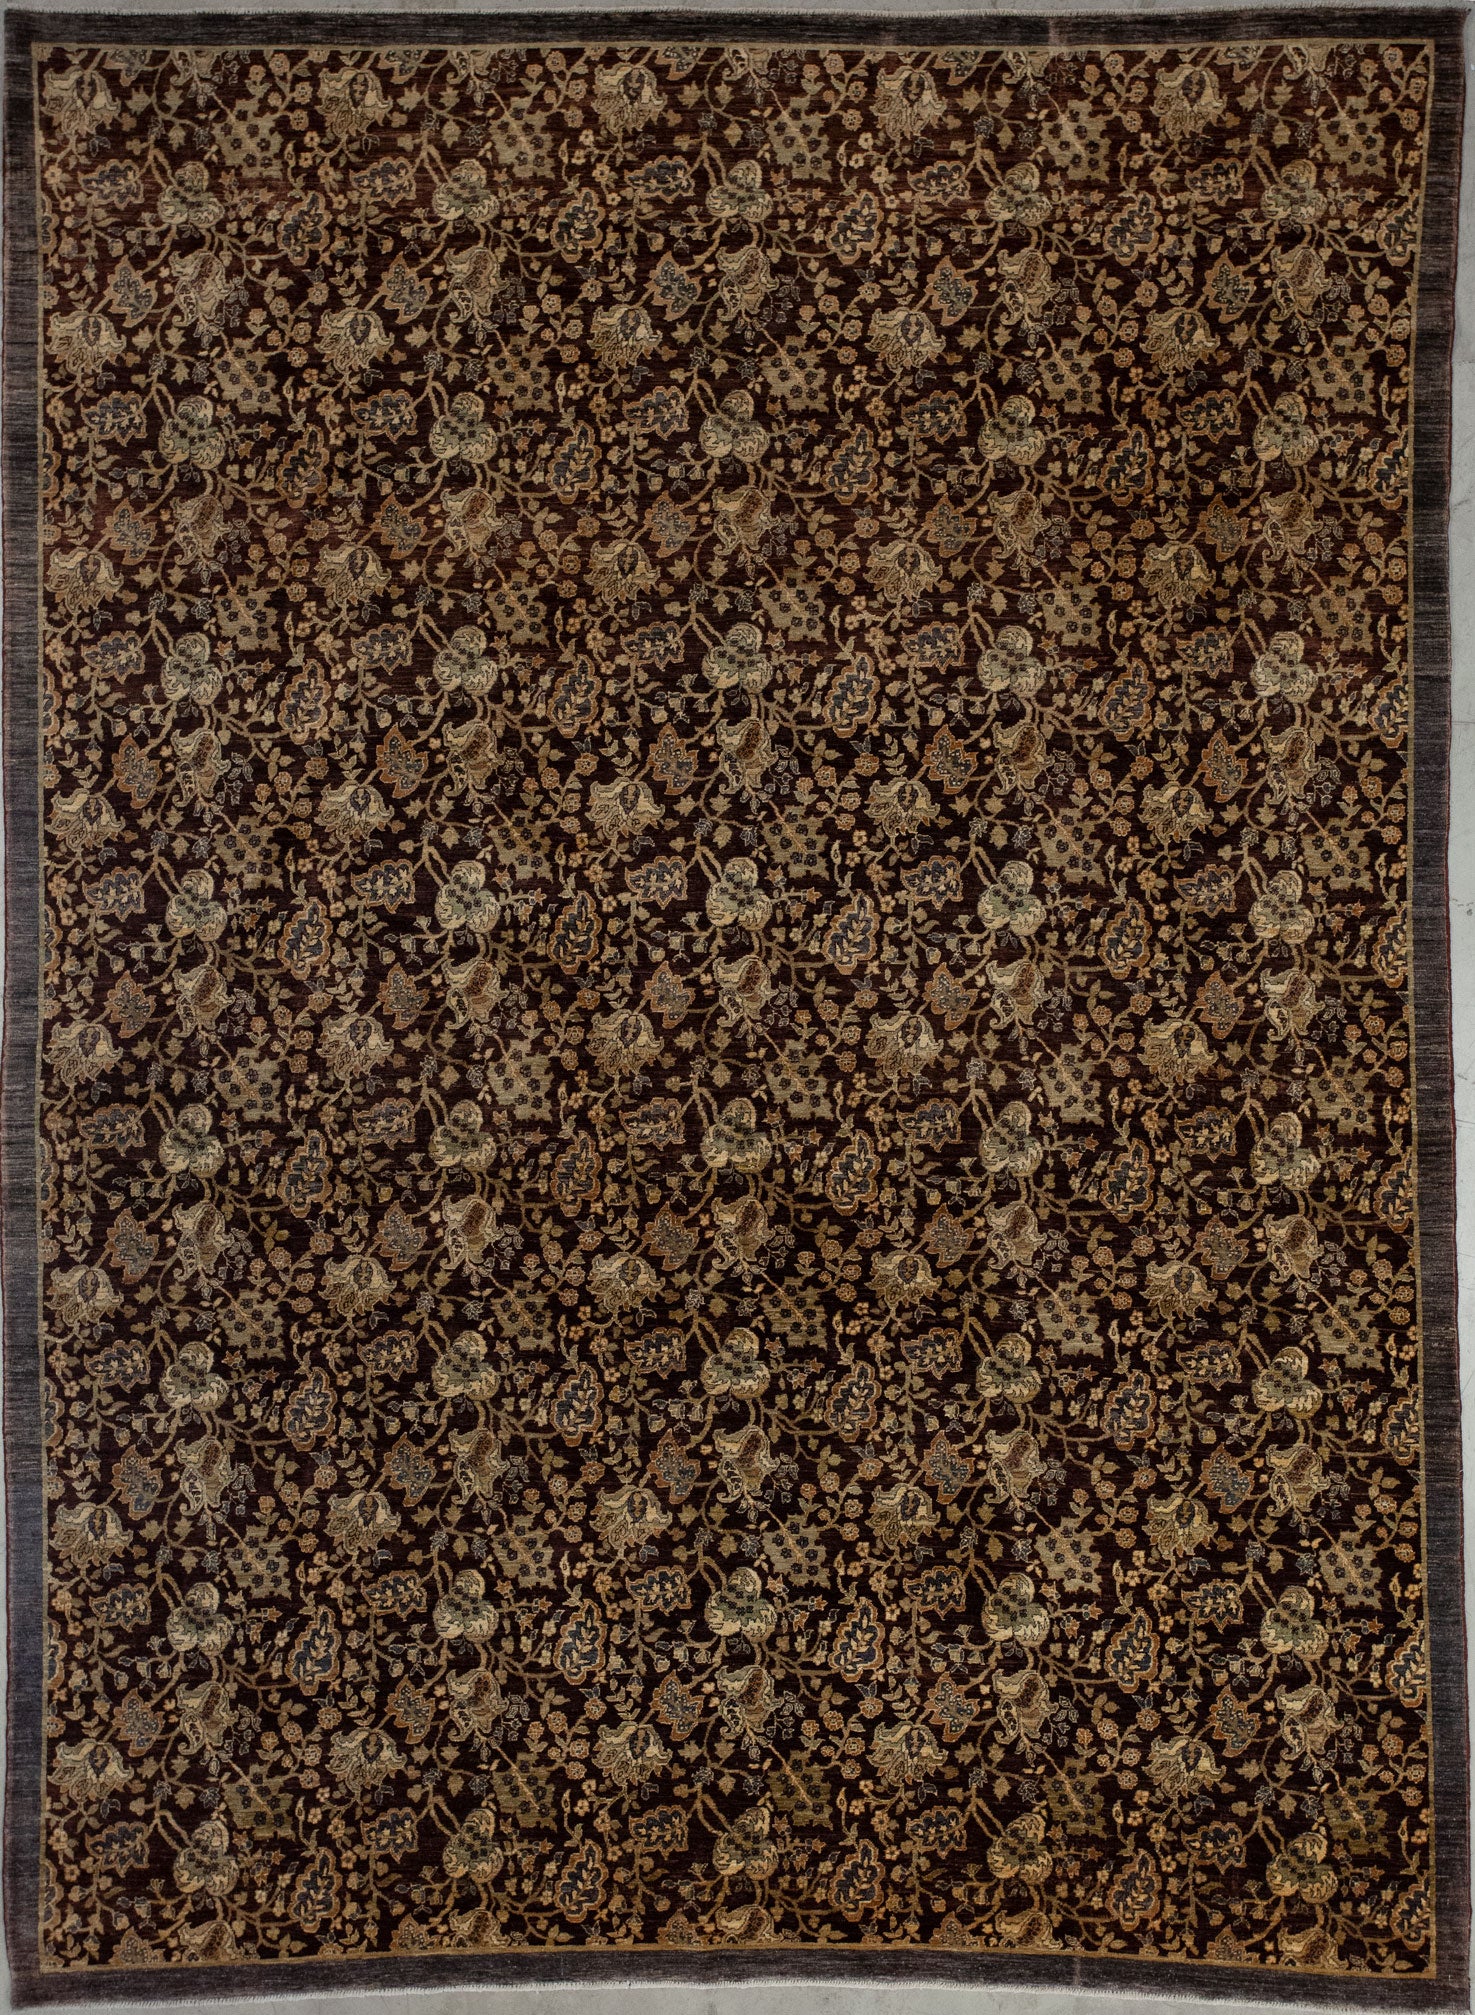 First-class carpet comes from the monarch collection. This classic rug was woven within brown variations, yellow highlights, and gray contour. 